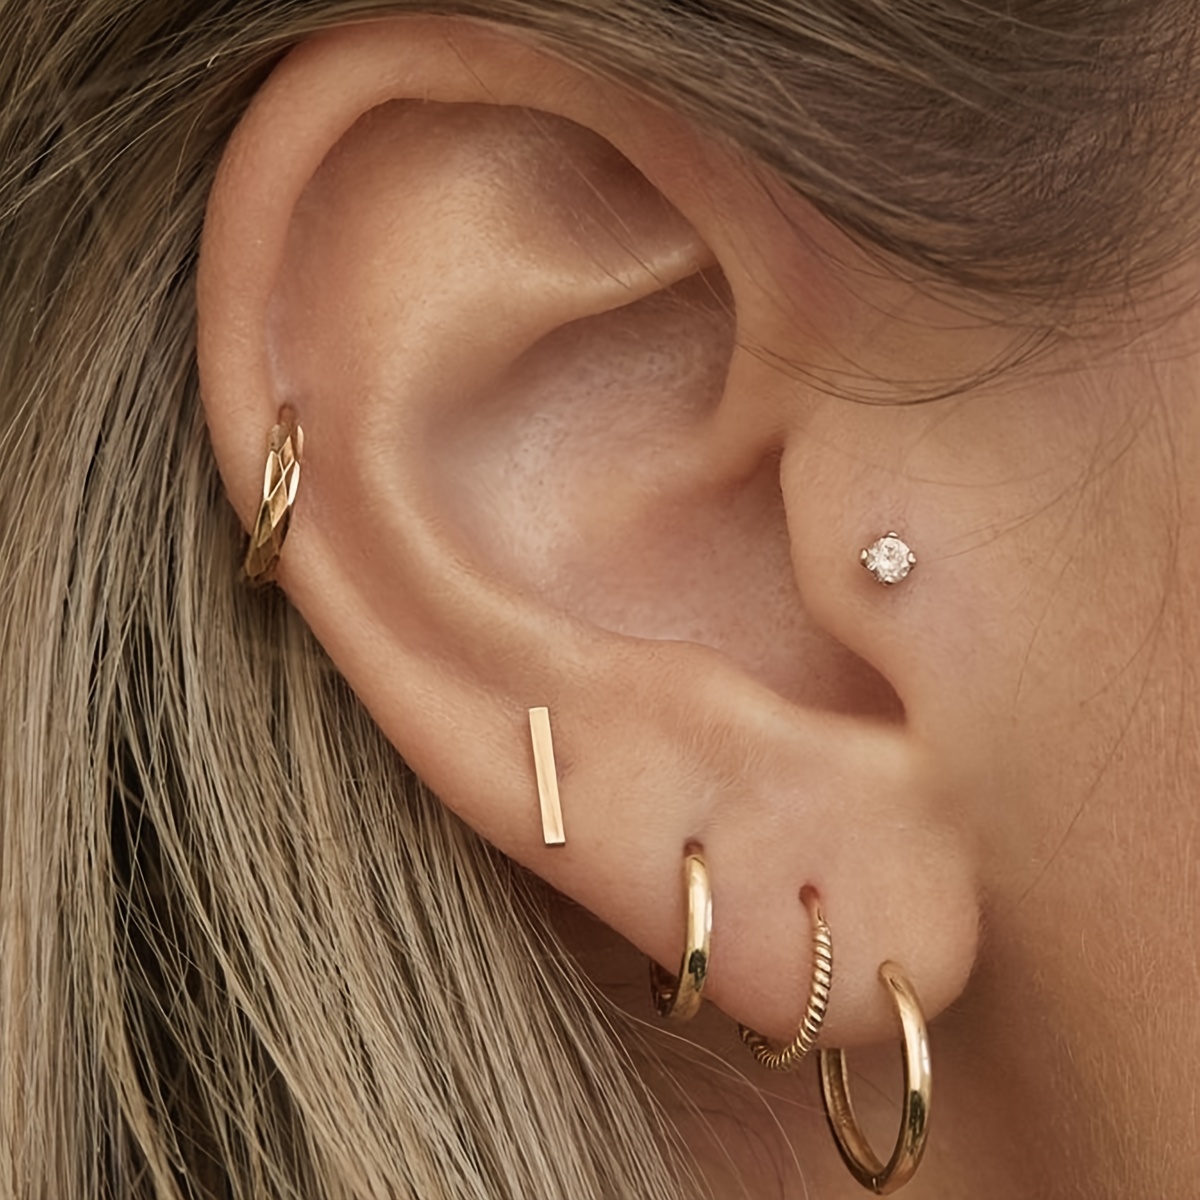 Women’s Earring Sets for Multiple Piercing: 14K Gold Plated Small Hoop  Earrings Tiny Flat Back Stud Earrings for Cartilage Helix Hypoallergenic  Set of